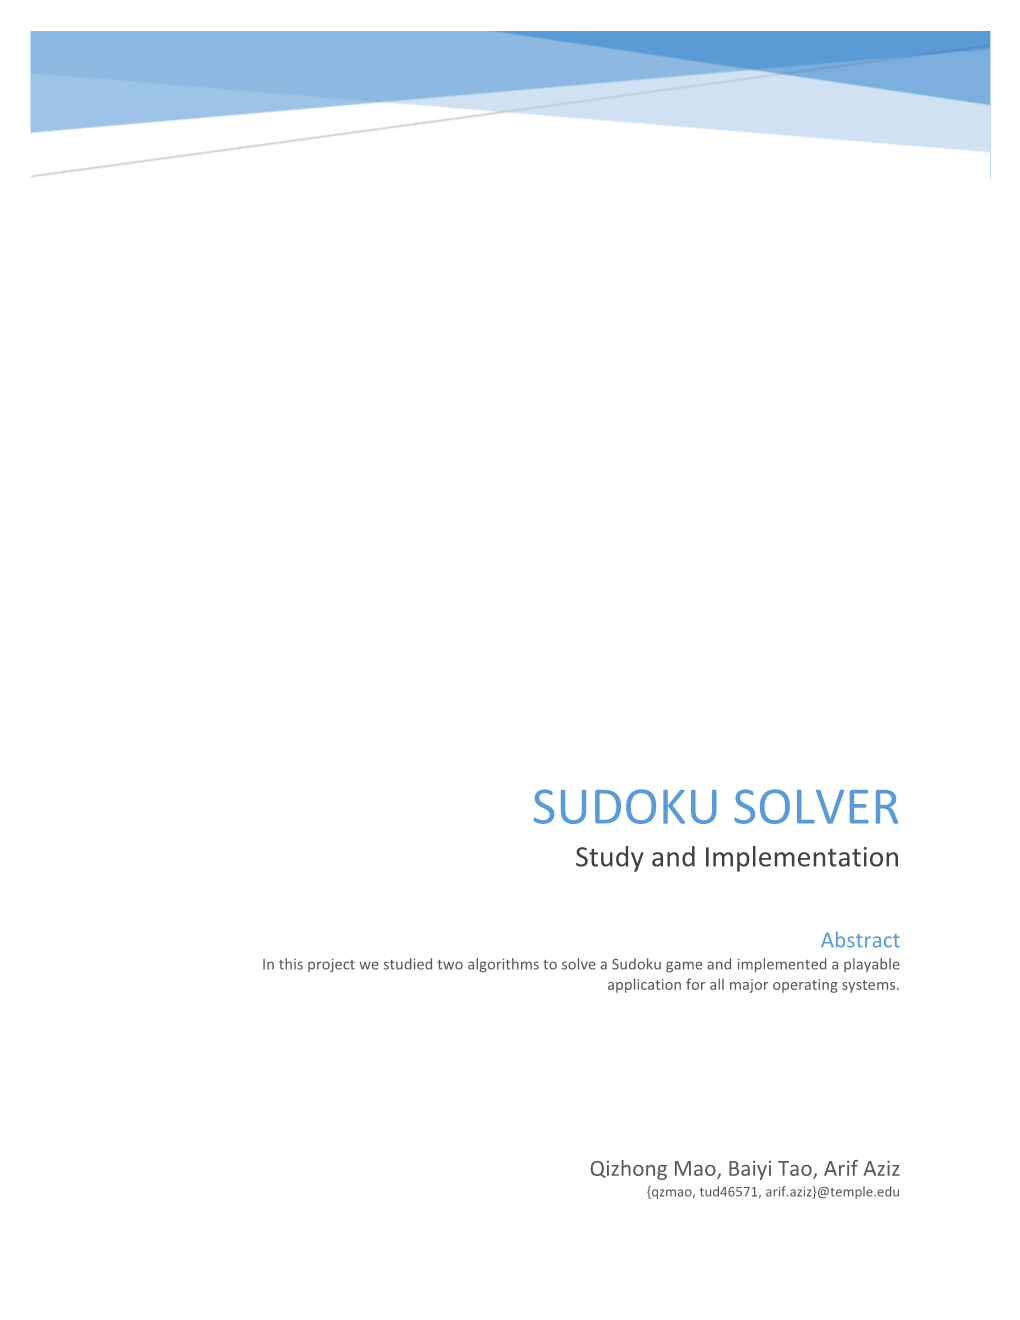 SUDOKU SOLVER Study and Implementation